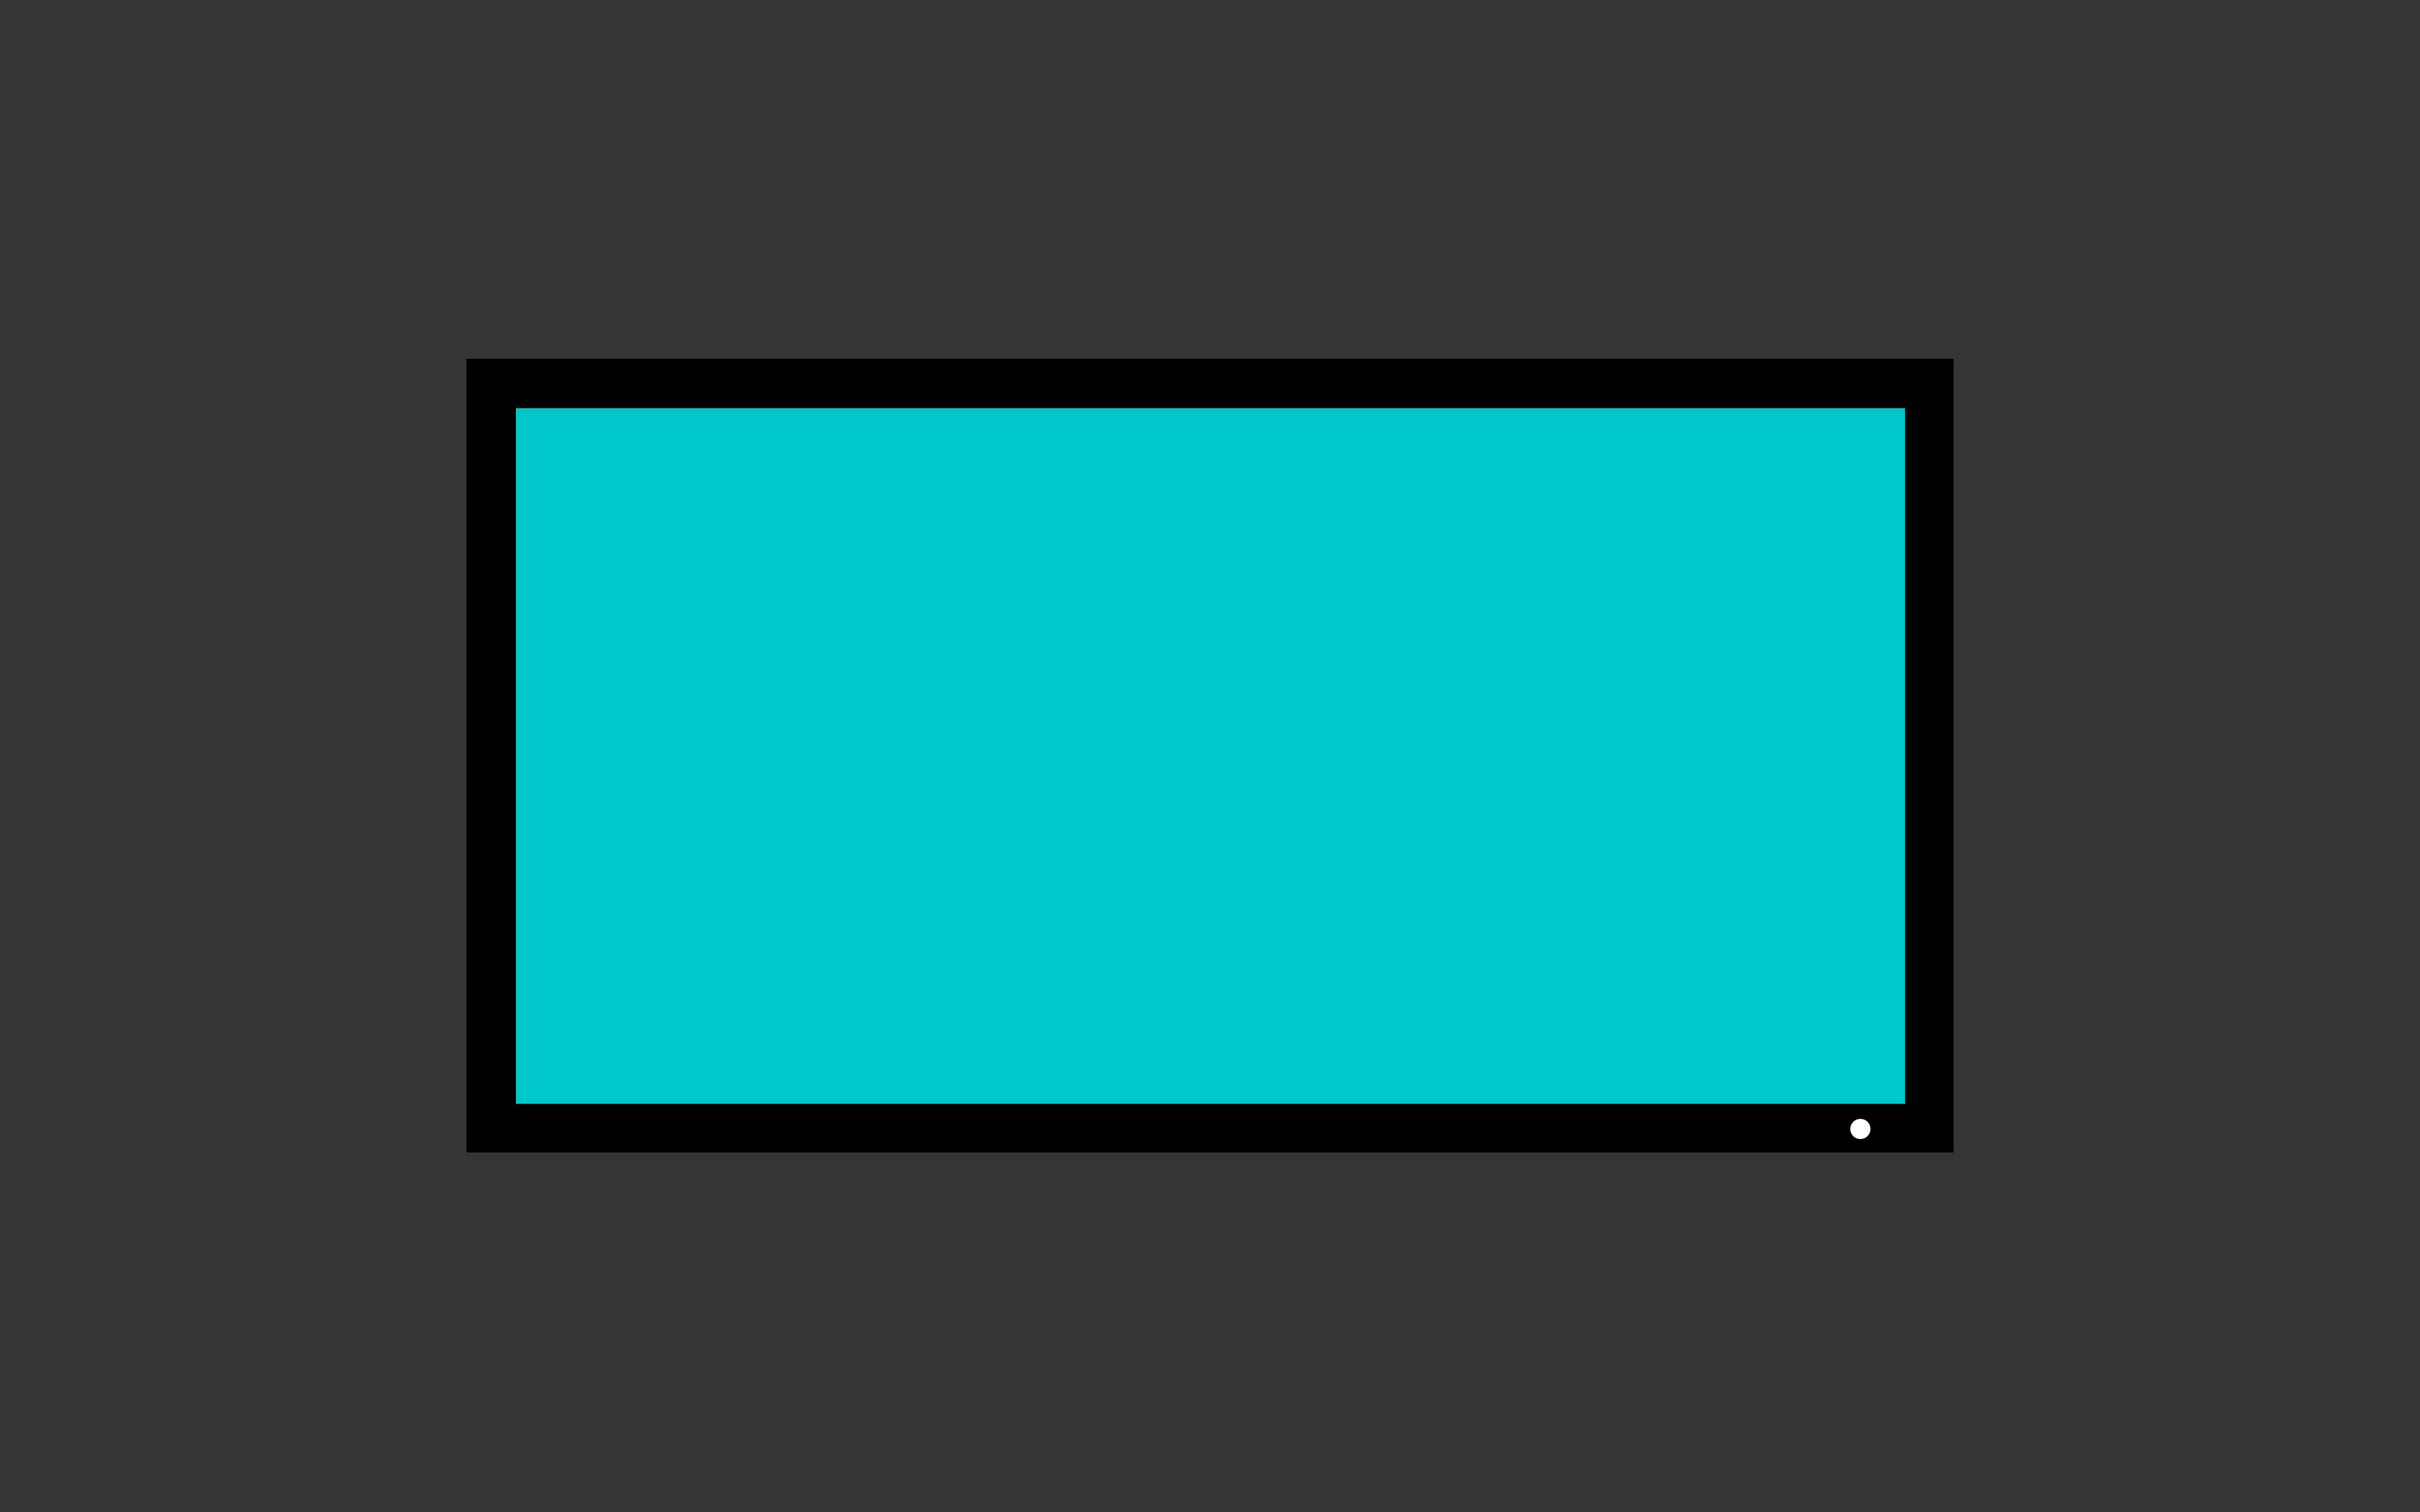 A black square with a blue-green background on a black background - Turquoise